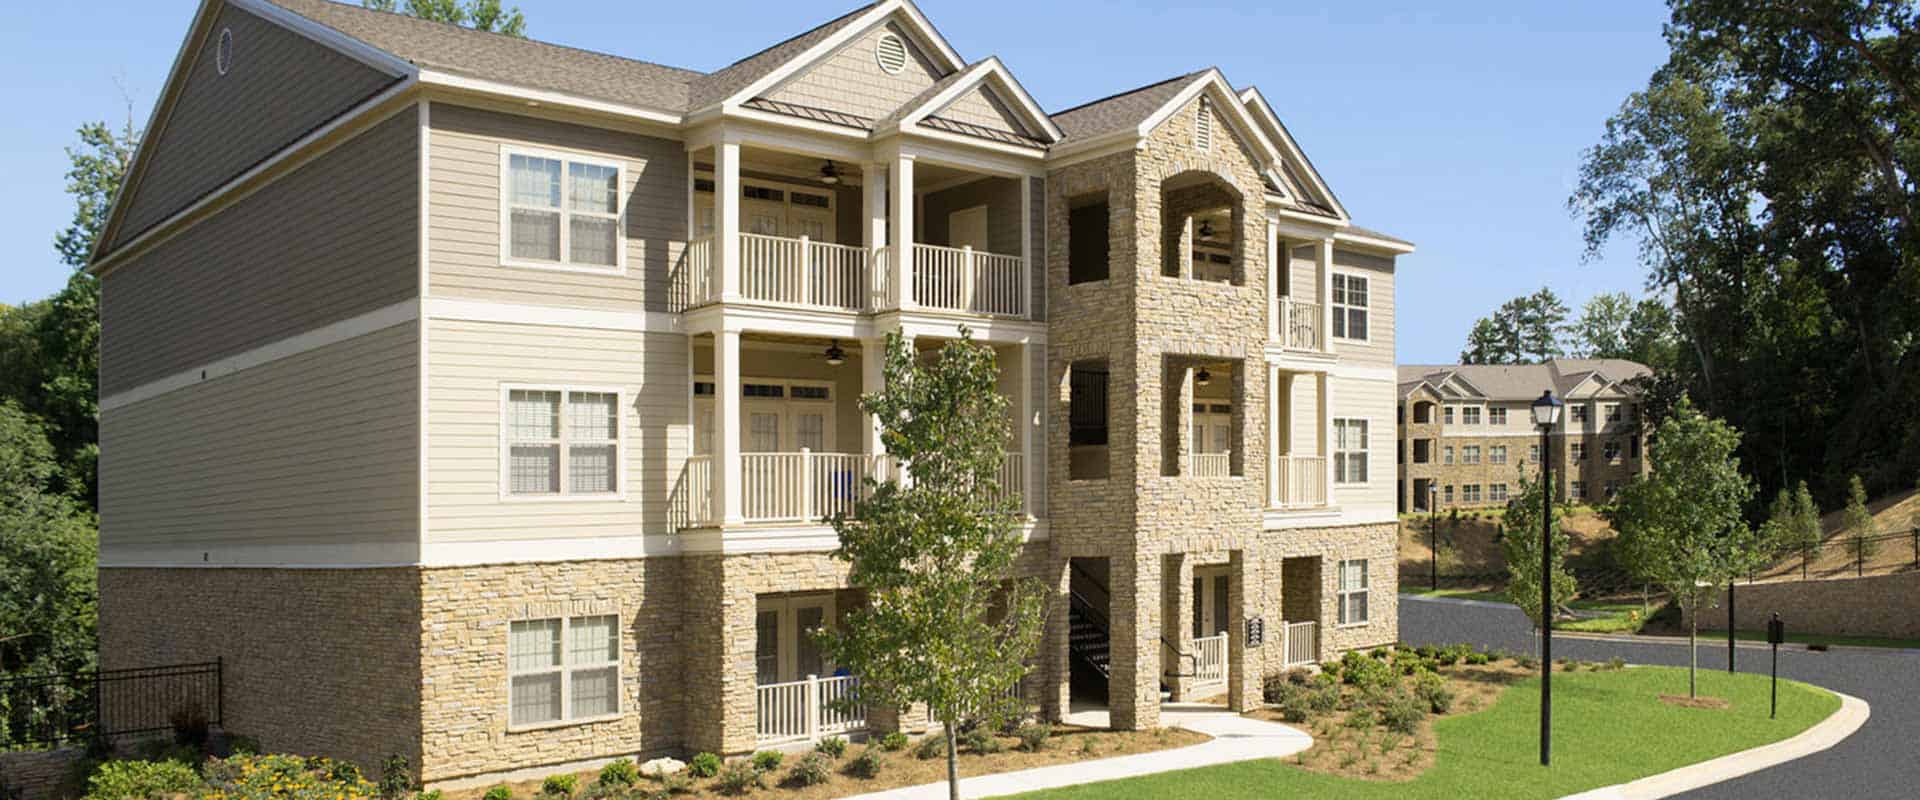 A comfortable place to stay and enjoy the luxury of fine apartment living in Greystone's Columbus, GA Apartments